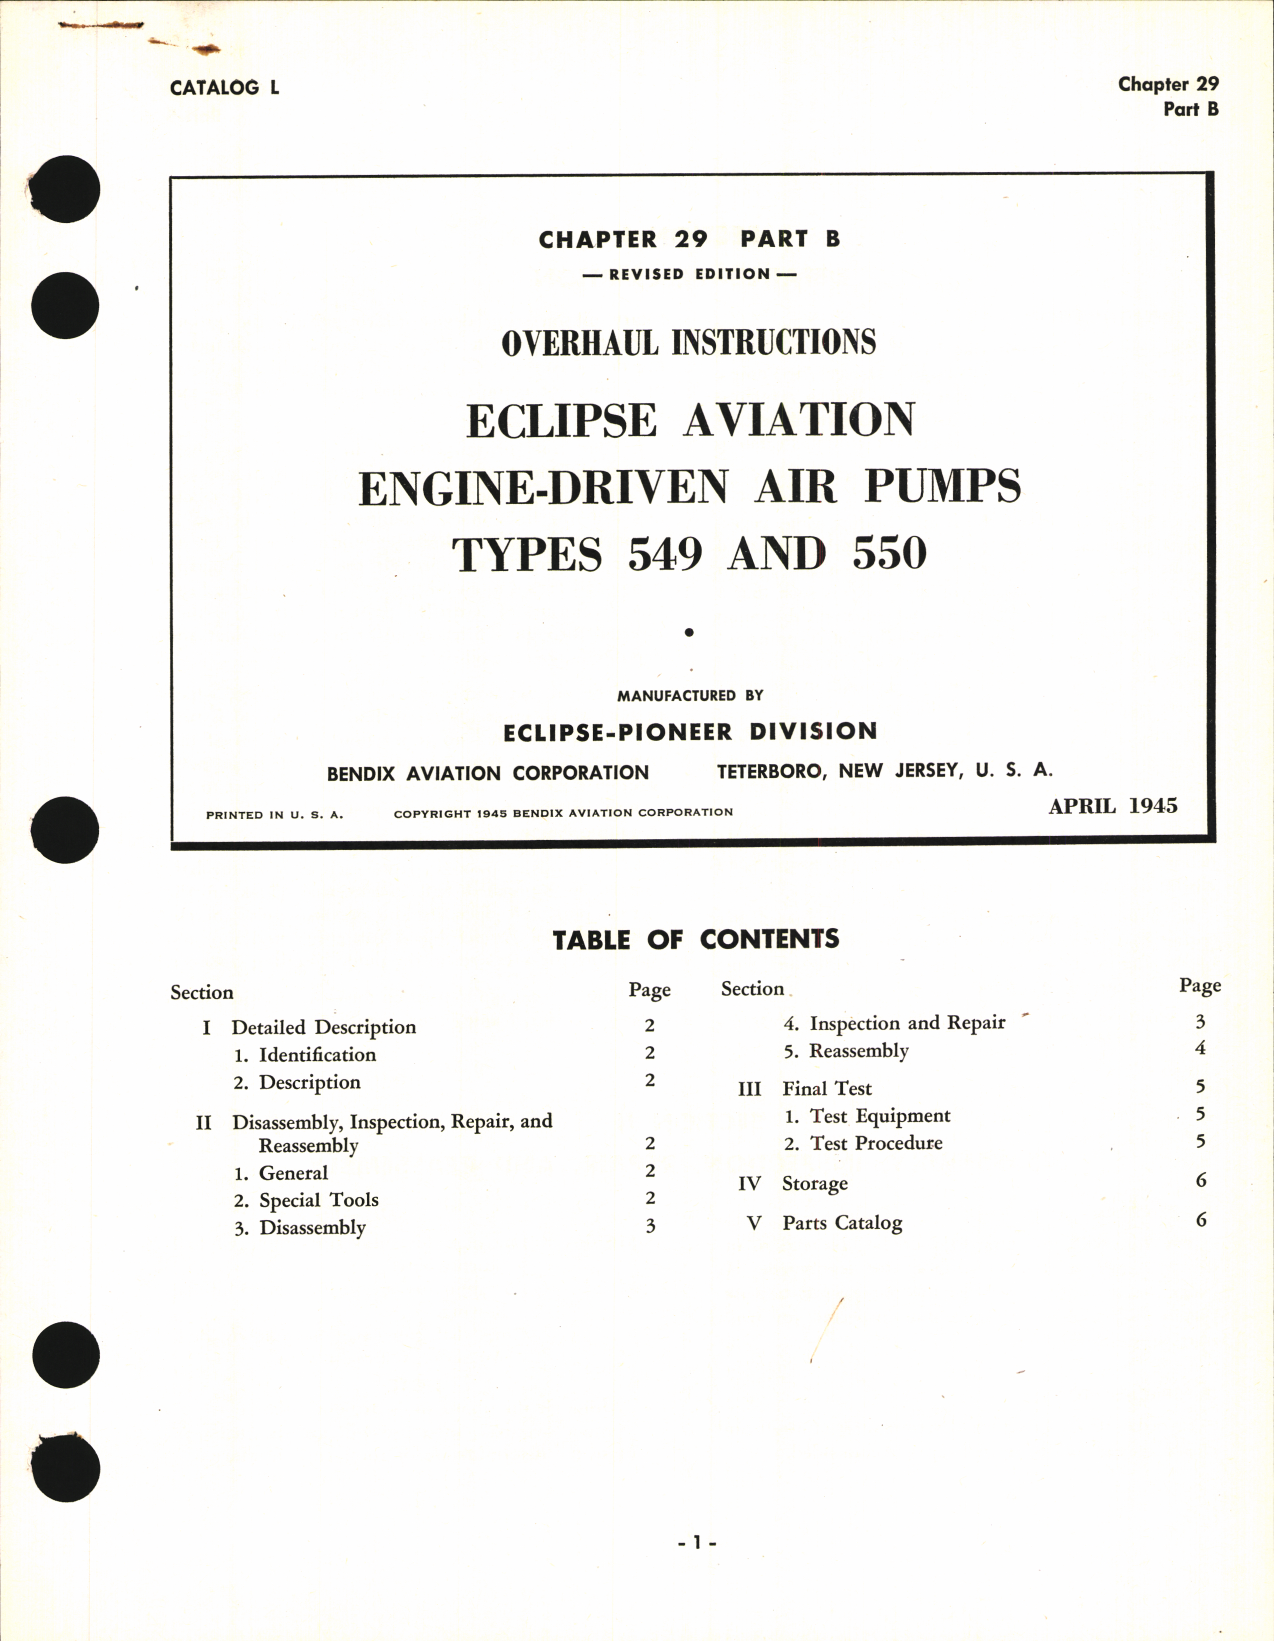 Sample page 7 from AirCorps Library document: Operating and Service Instructions for Eclipse Aviation Engine-Driven Air Pumps Types 549 and 550